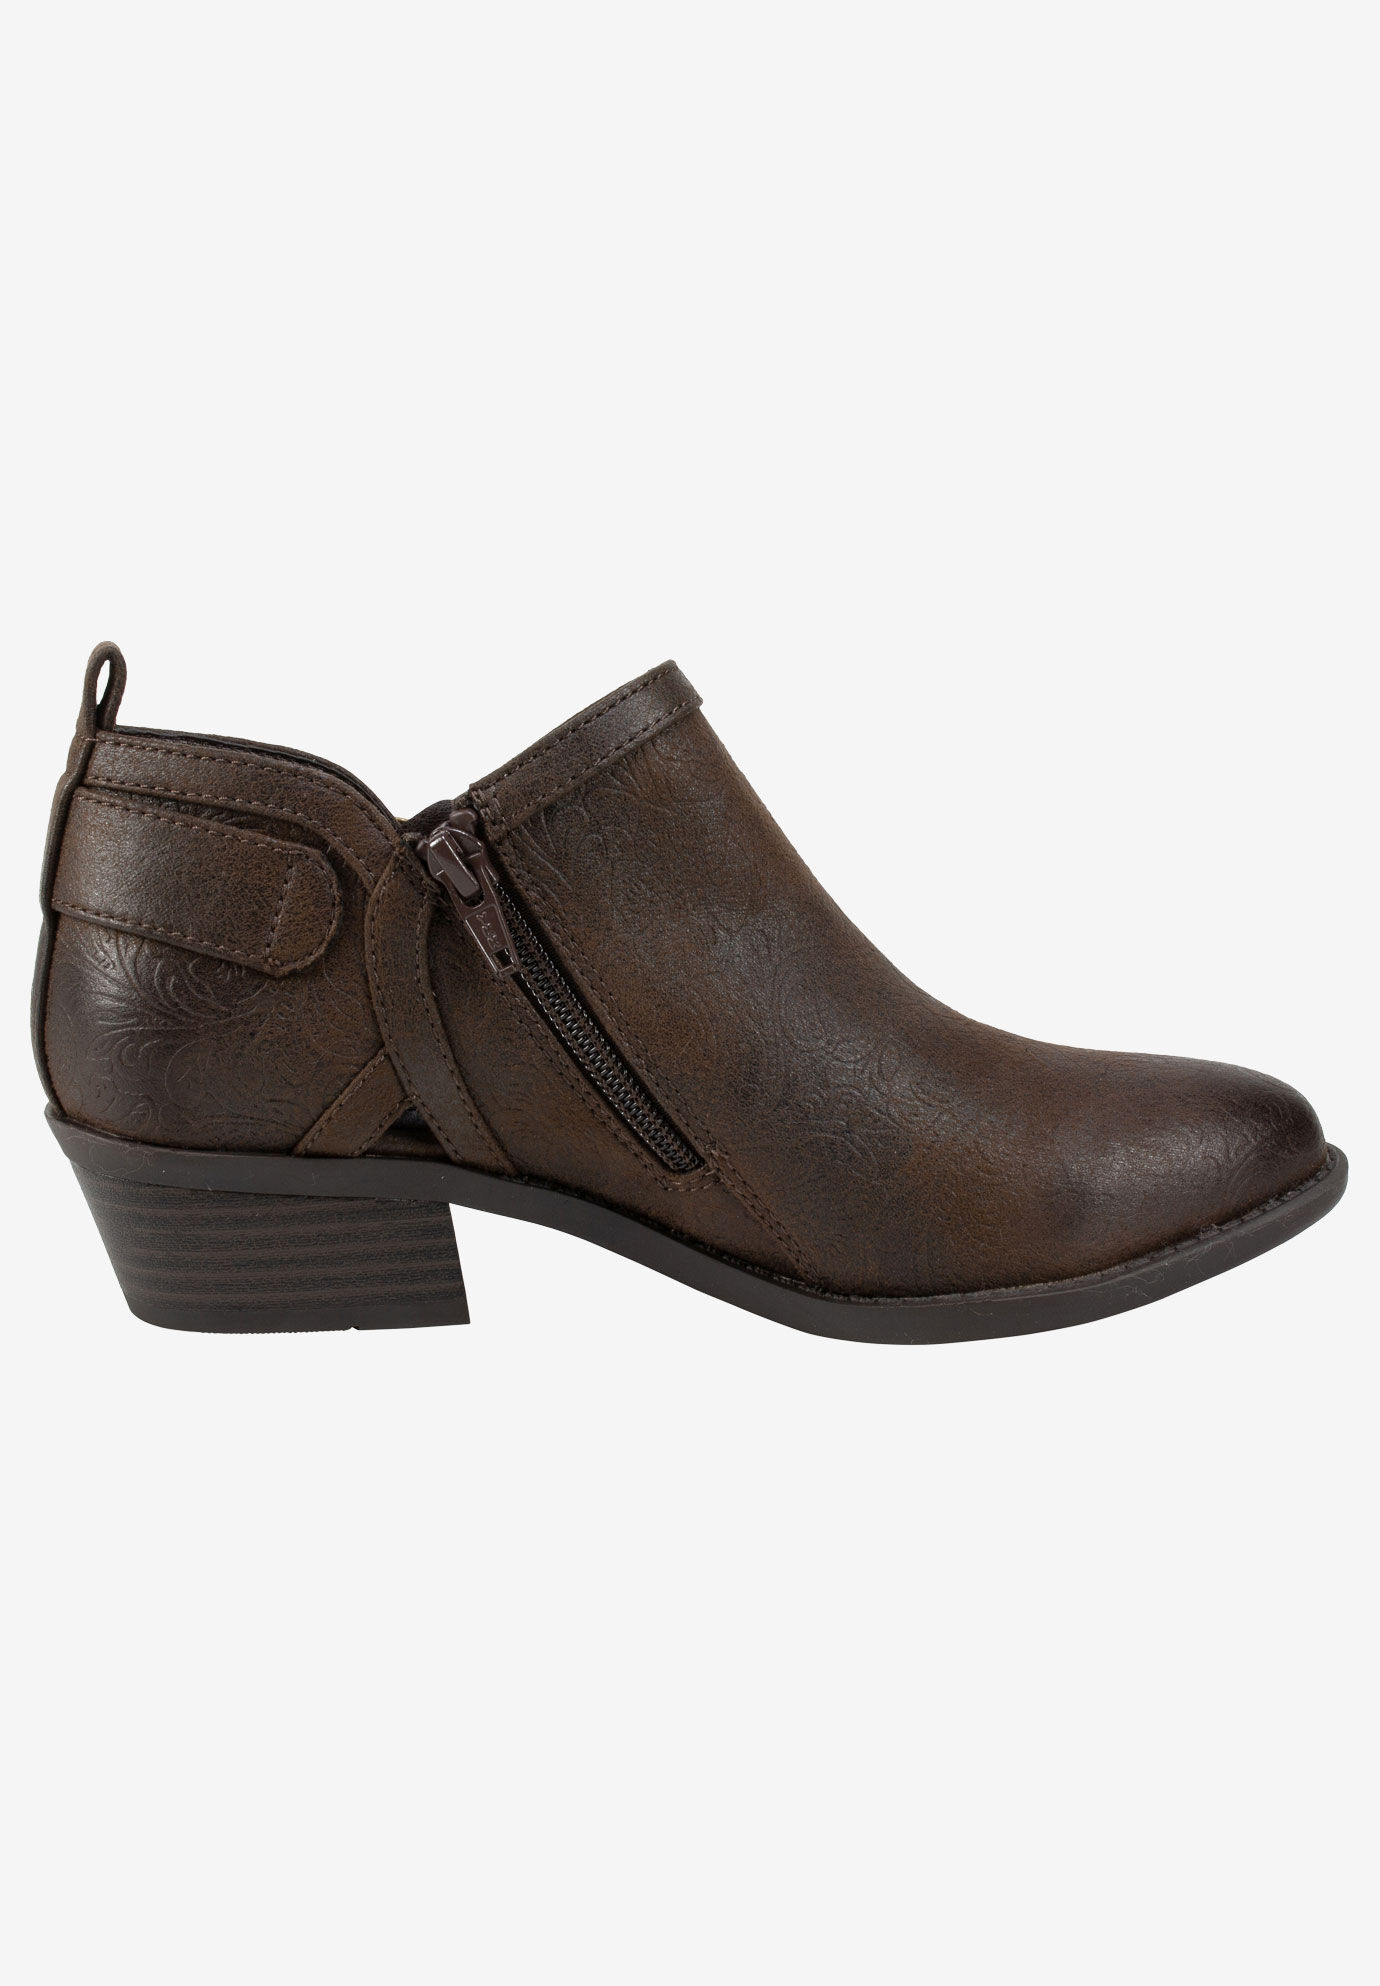 white mountain davenport western ankle booties